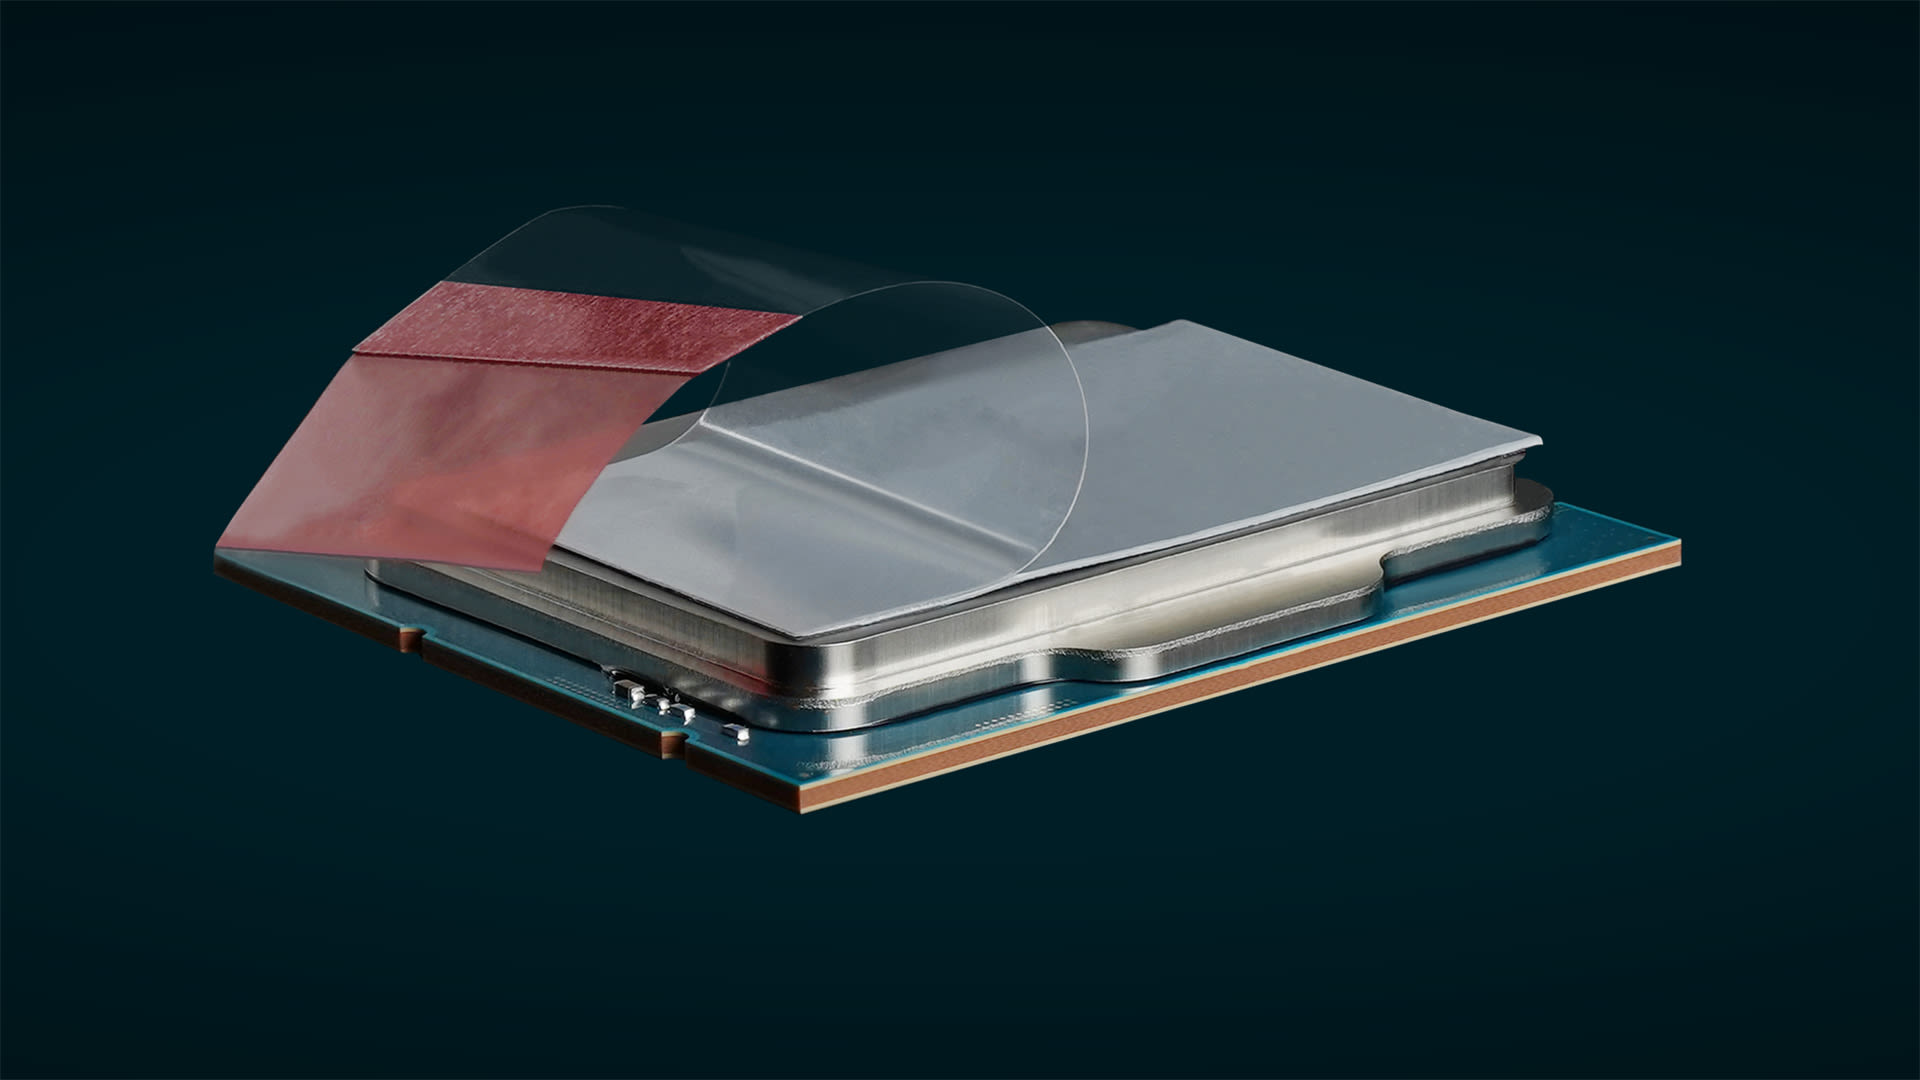 Thermal Grizzly's new thermal pad has a phase-changing design — the pad changes from solid to liquid above 45C